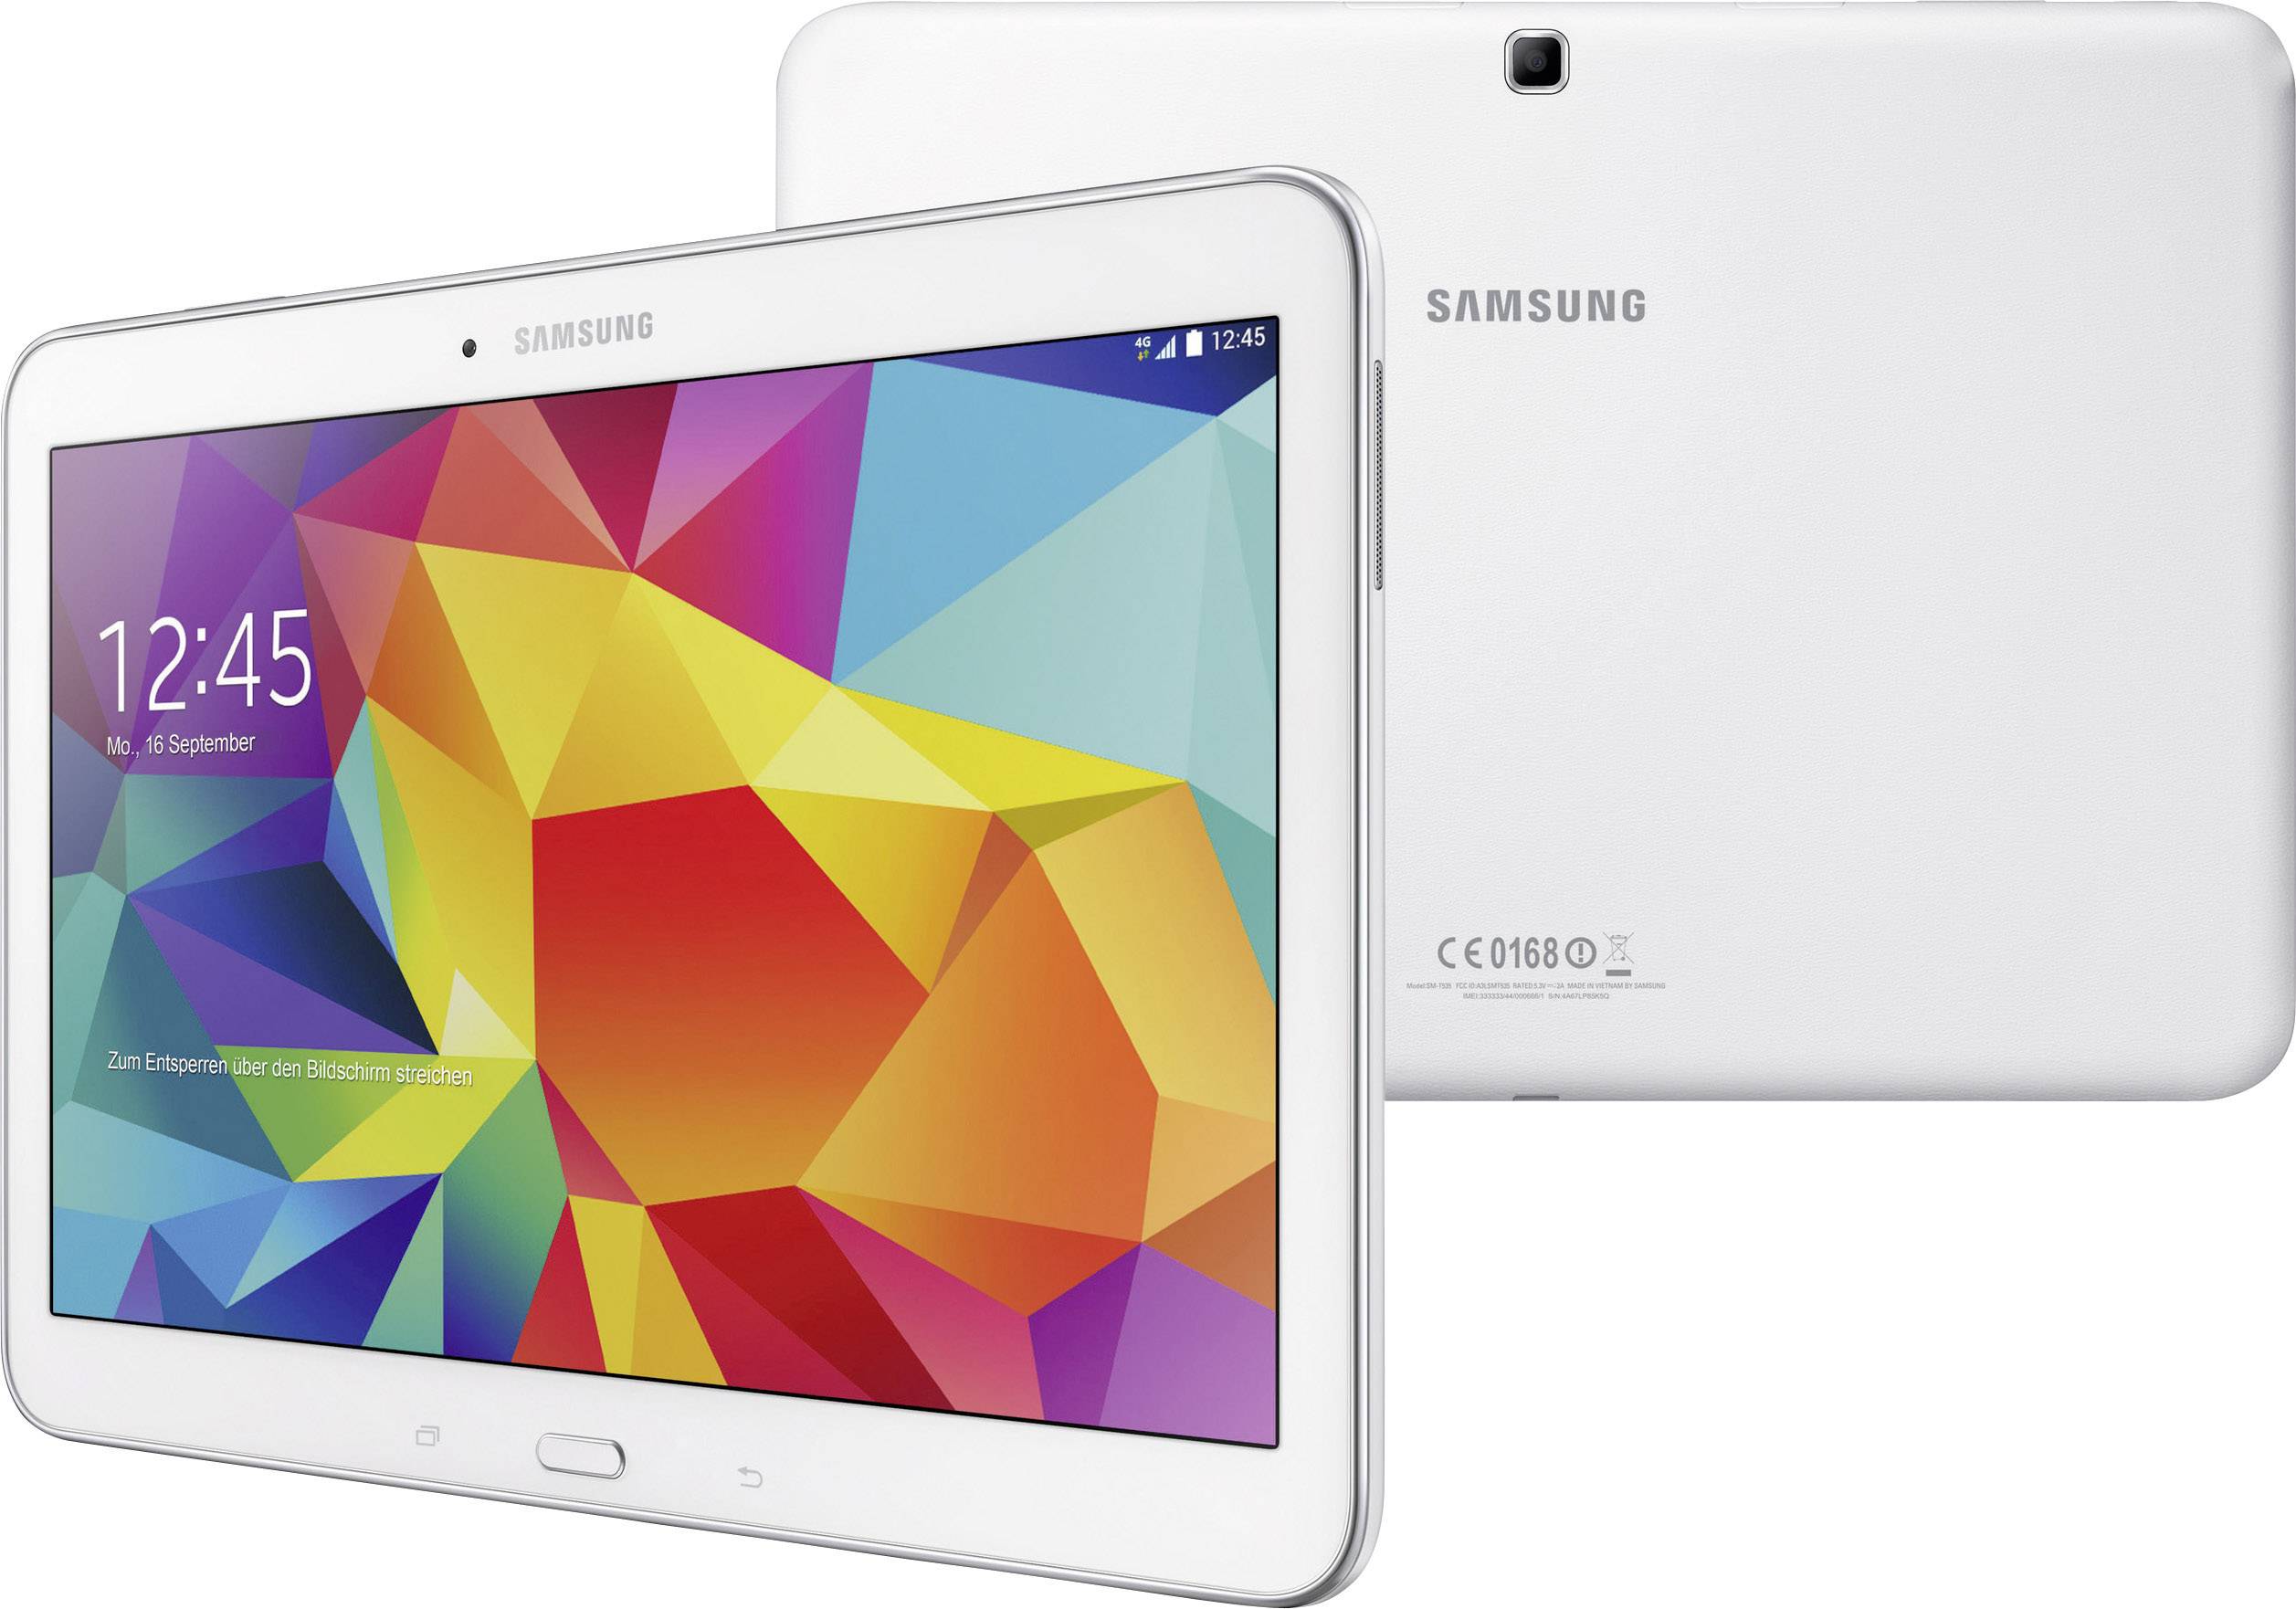 toxiciteit hypotheek oosten Samsung Galaxy Tab 4 LTE/4G 16 GB Wit Android-tablet 25.7 cm (10.1 inch)  1.2 GHz Android 4.4 1280 x 800 Pixel | Conrad.nl